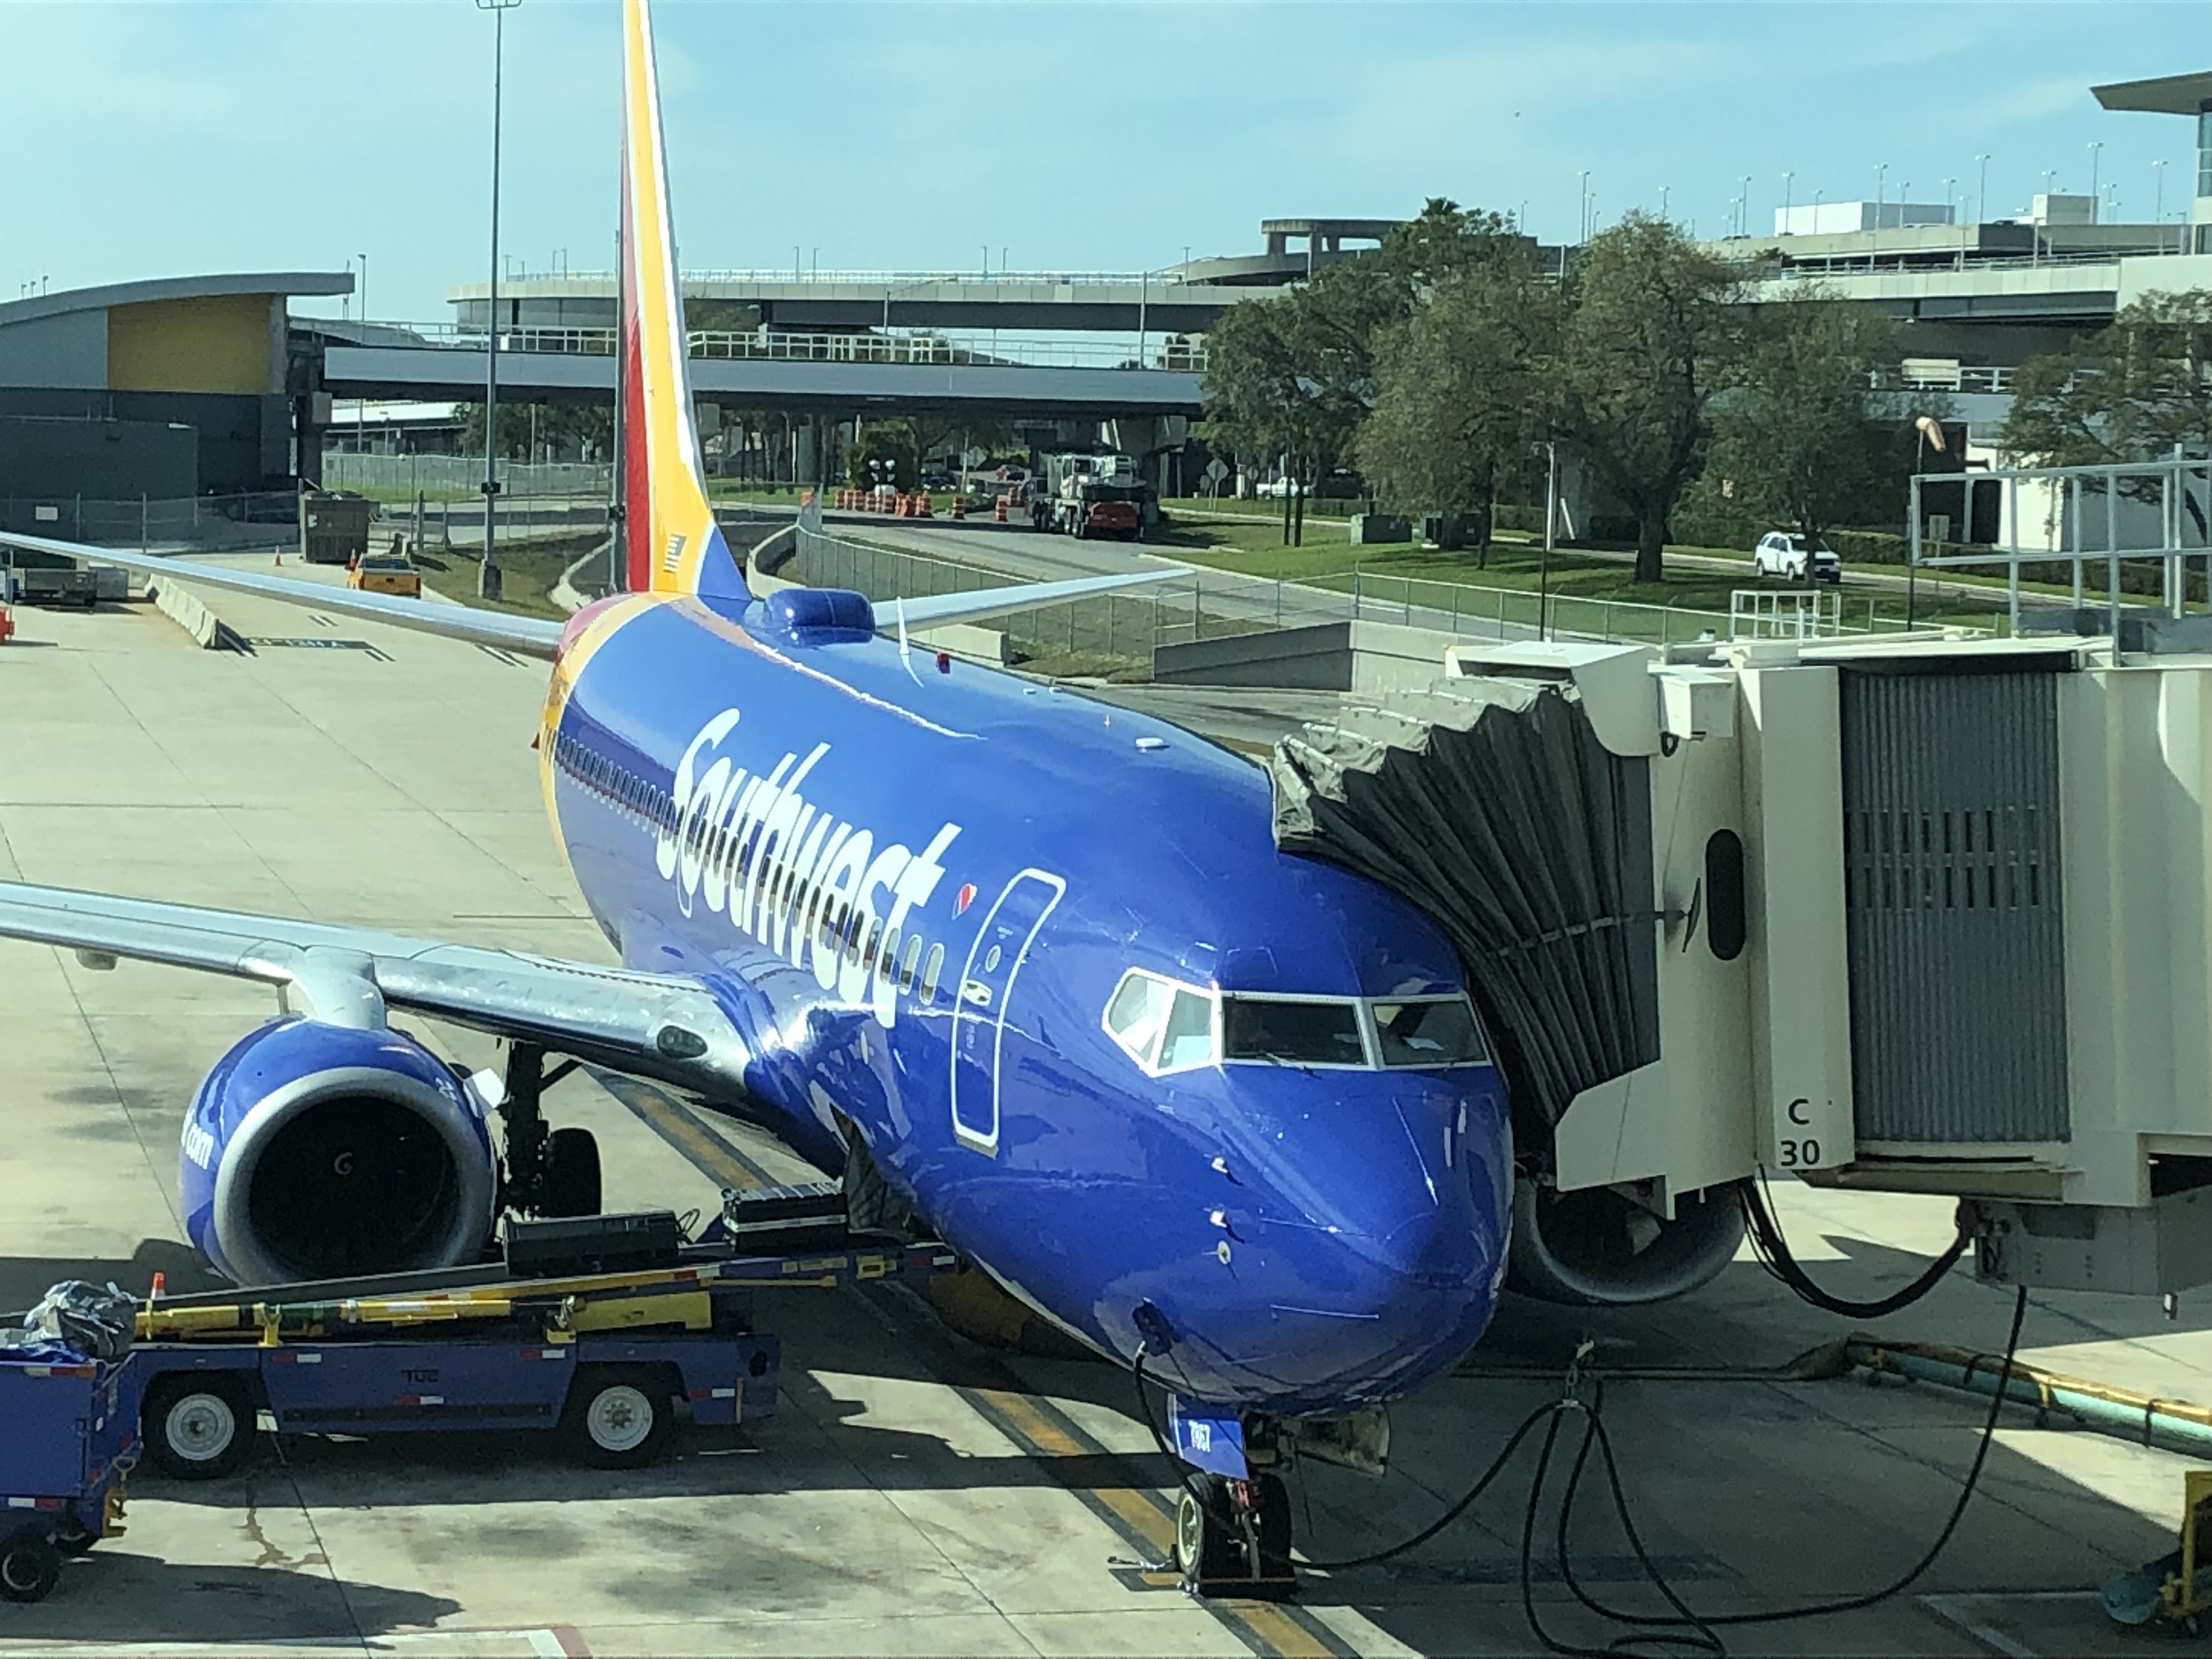 Southwest is Flying to Hawaii! FAA Approval Granted!